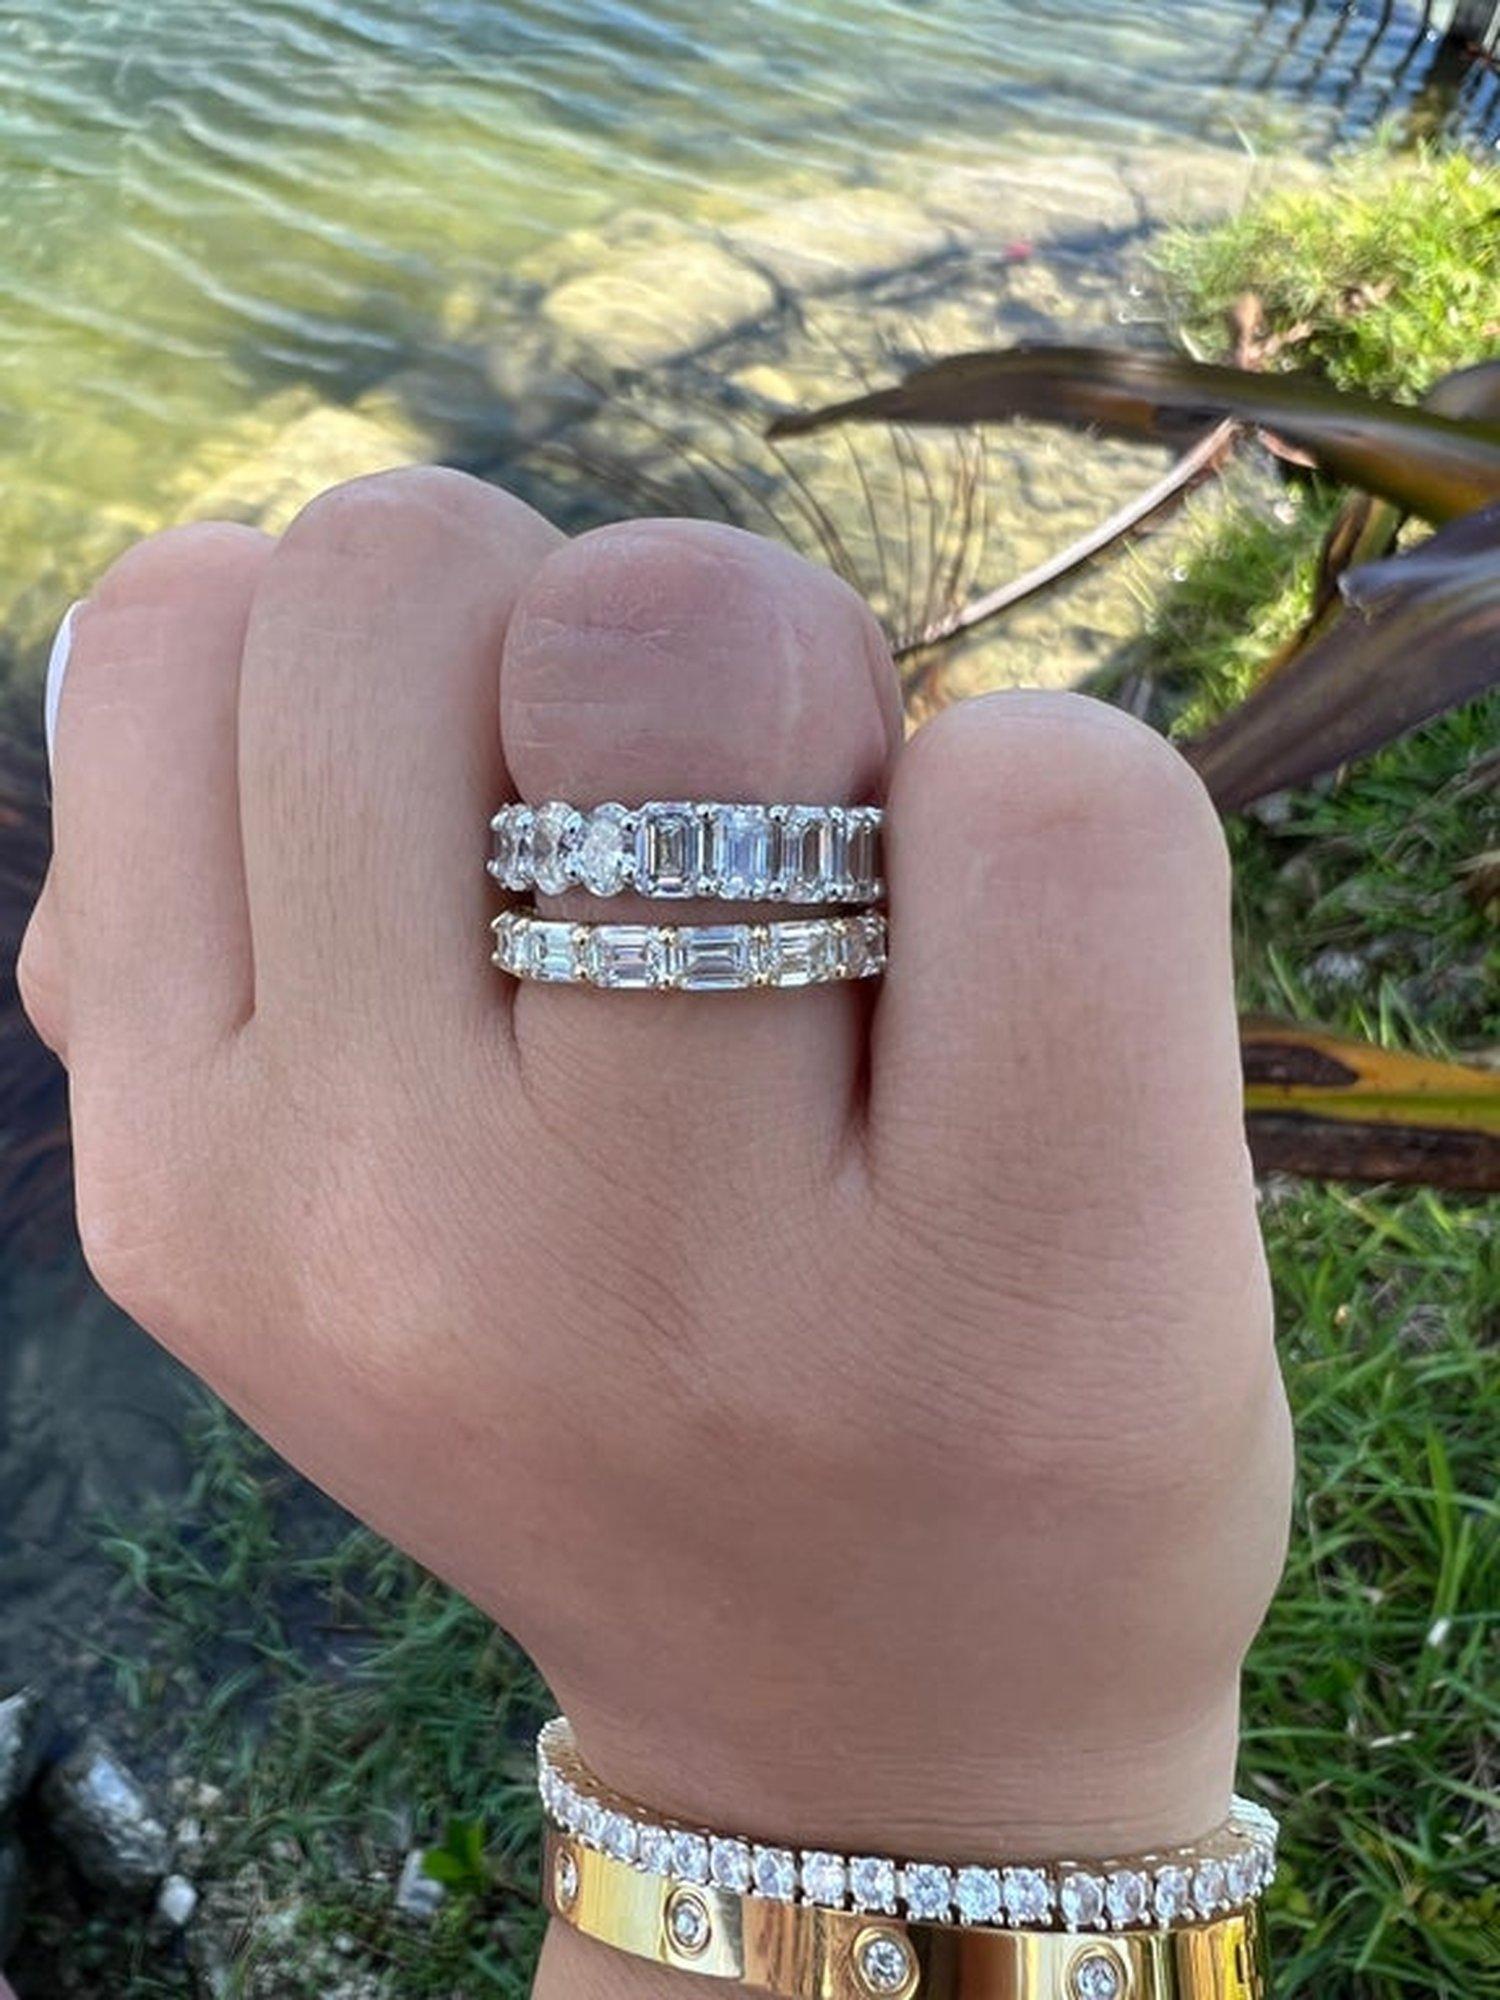 The East To West Emerald Cut Diamond Eternity Band is the trendiest diamond eternity band now. The placement of these diamonds makes them perfect for stacking with any ring, or great to wear on their own. This beautiful trendy piece is definitely